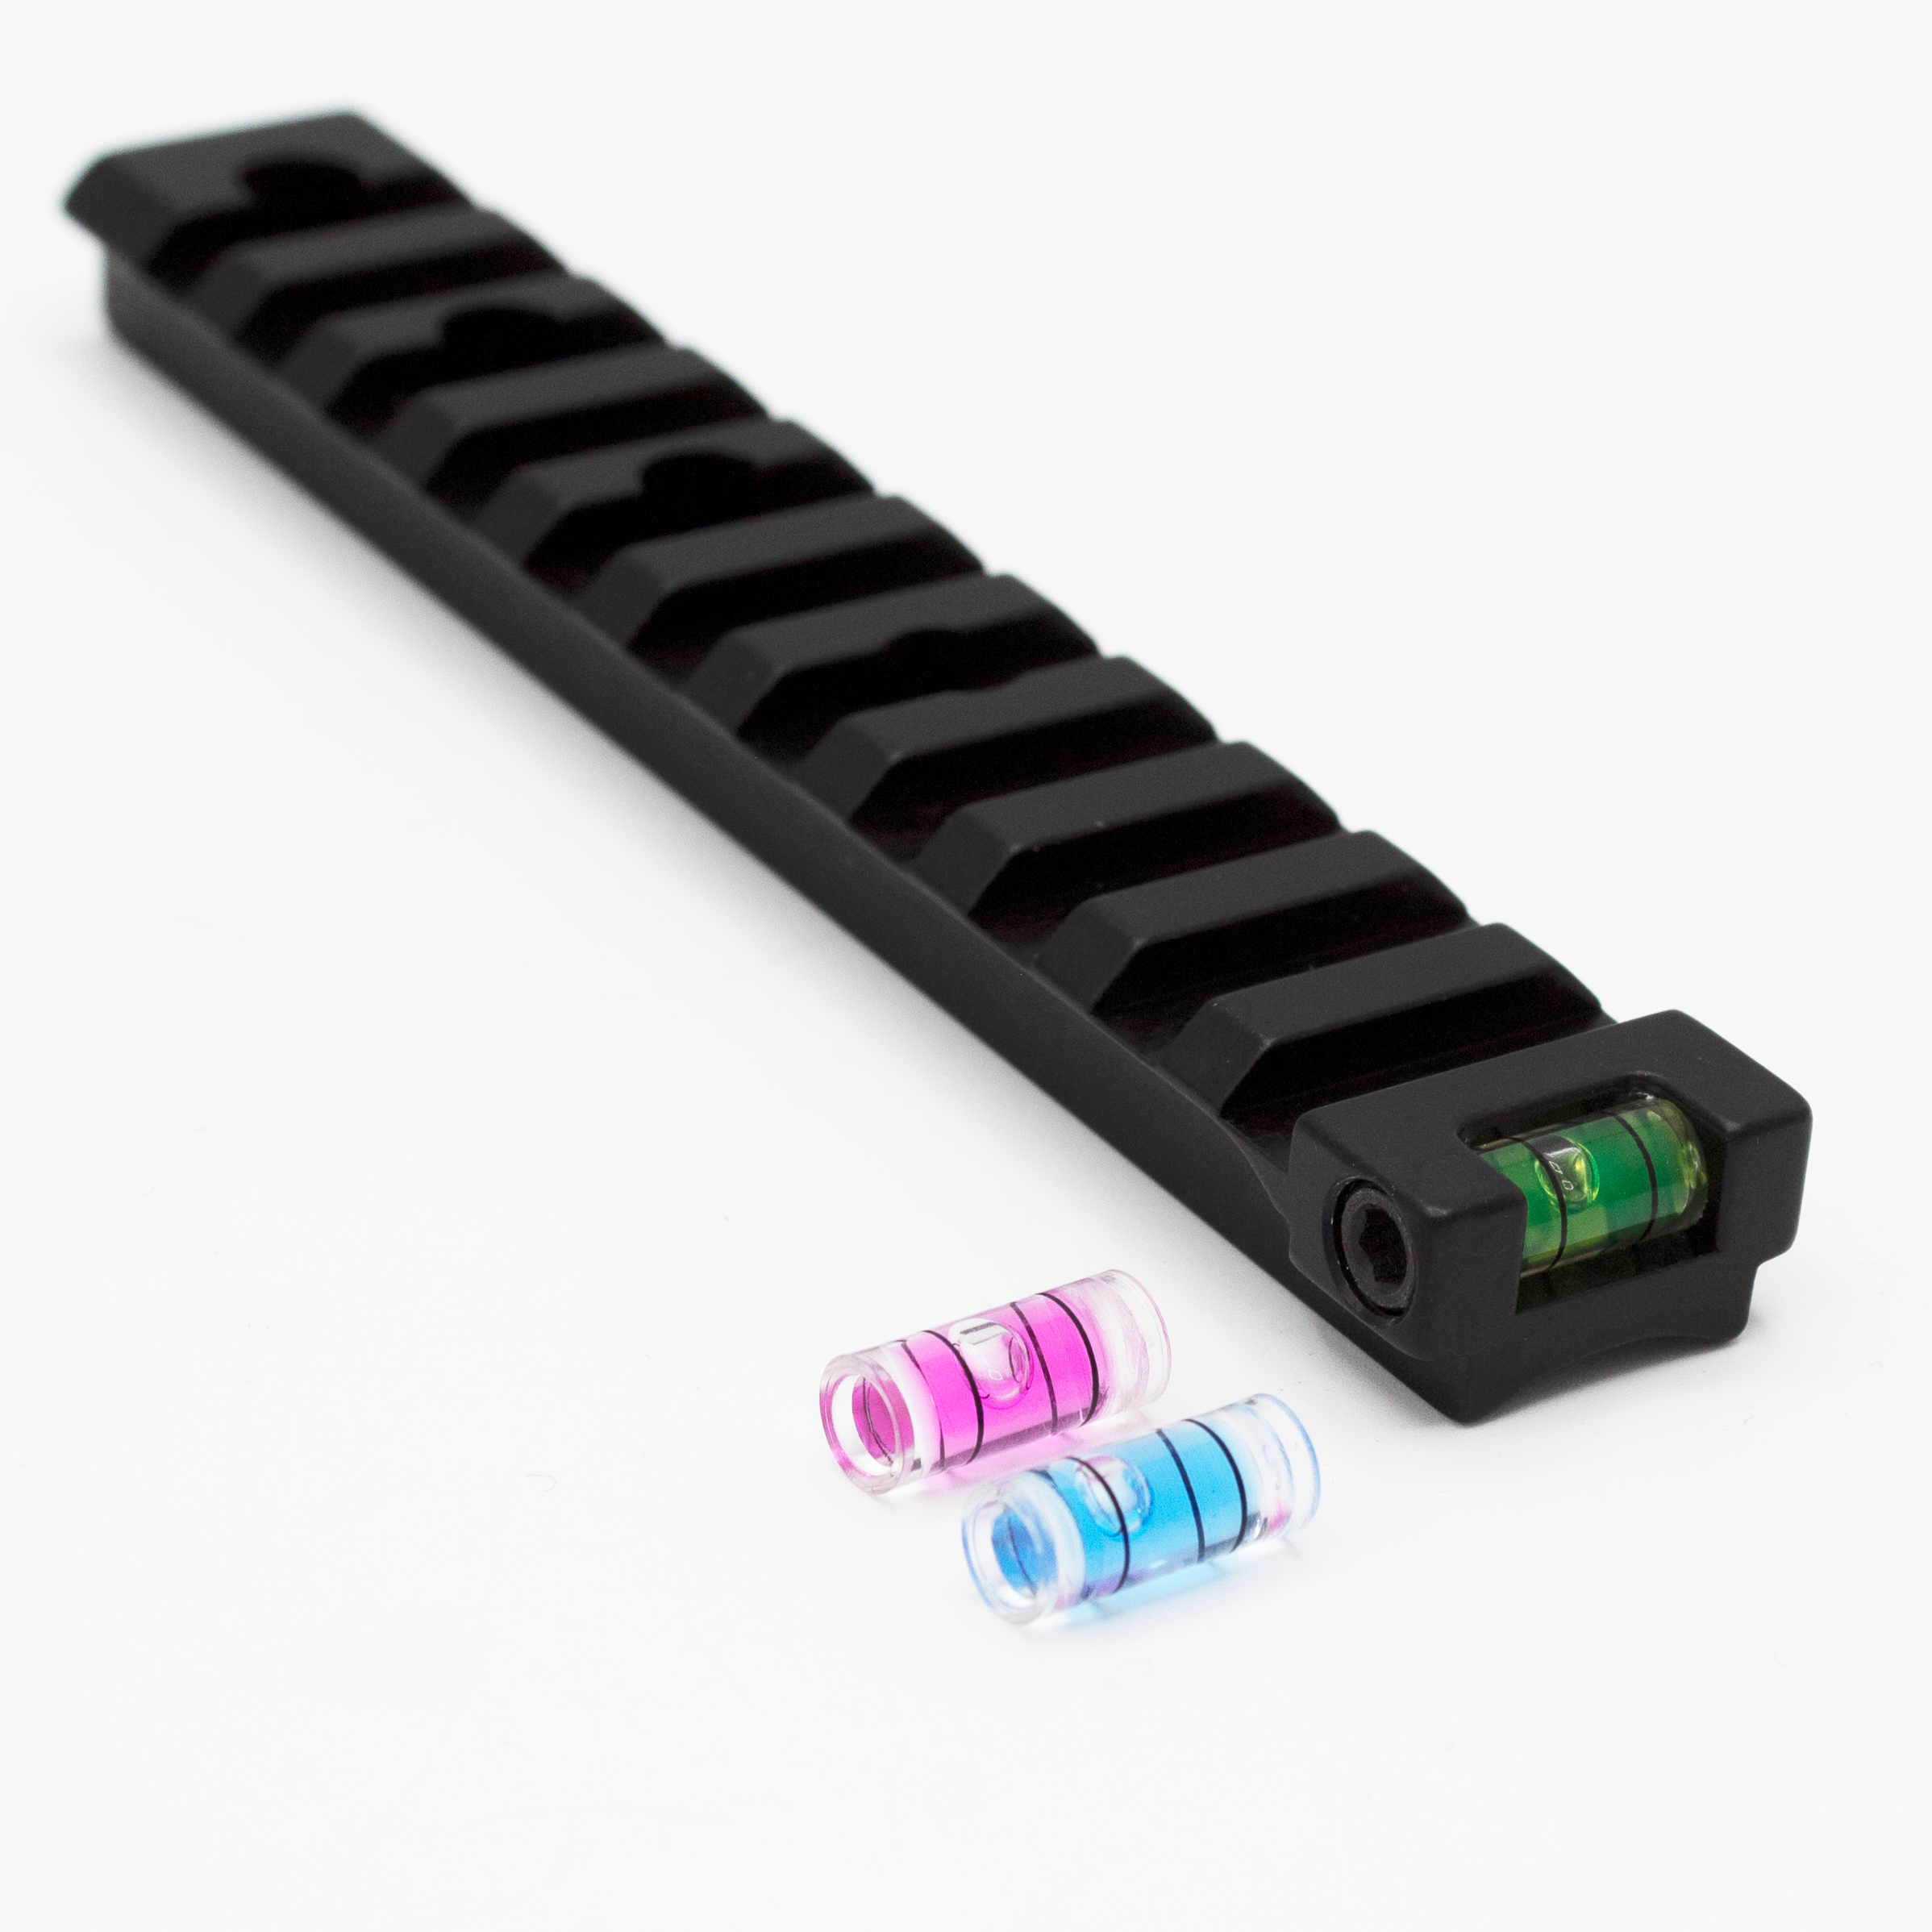 Is this rail compatible with the CVA accura lr-x?